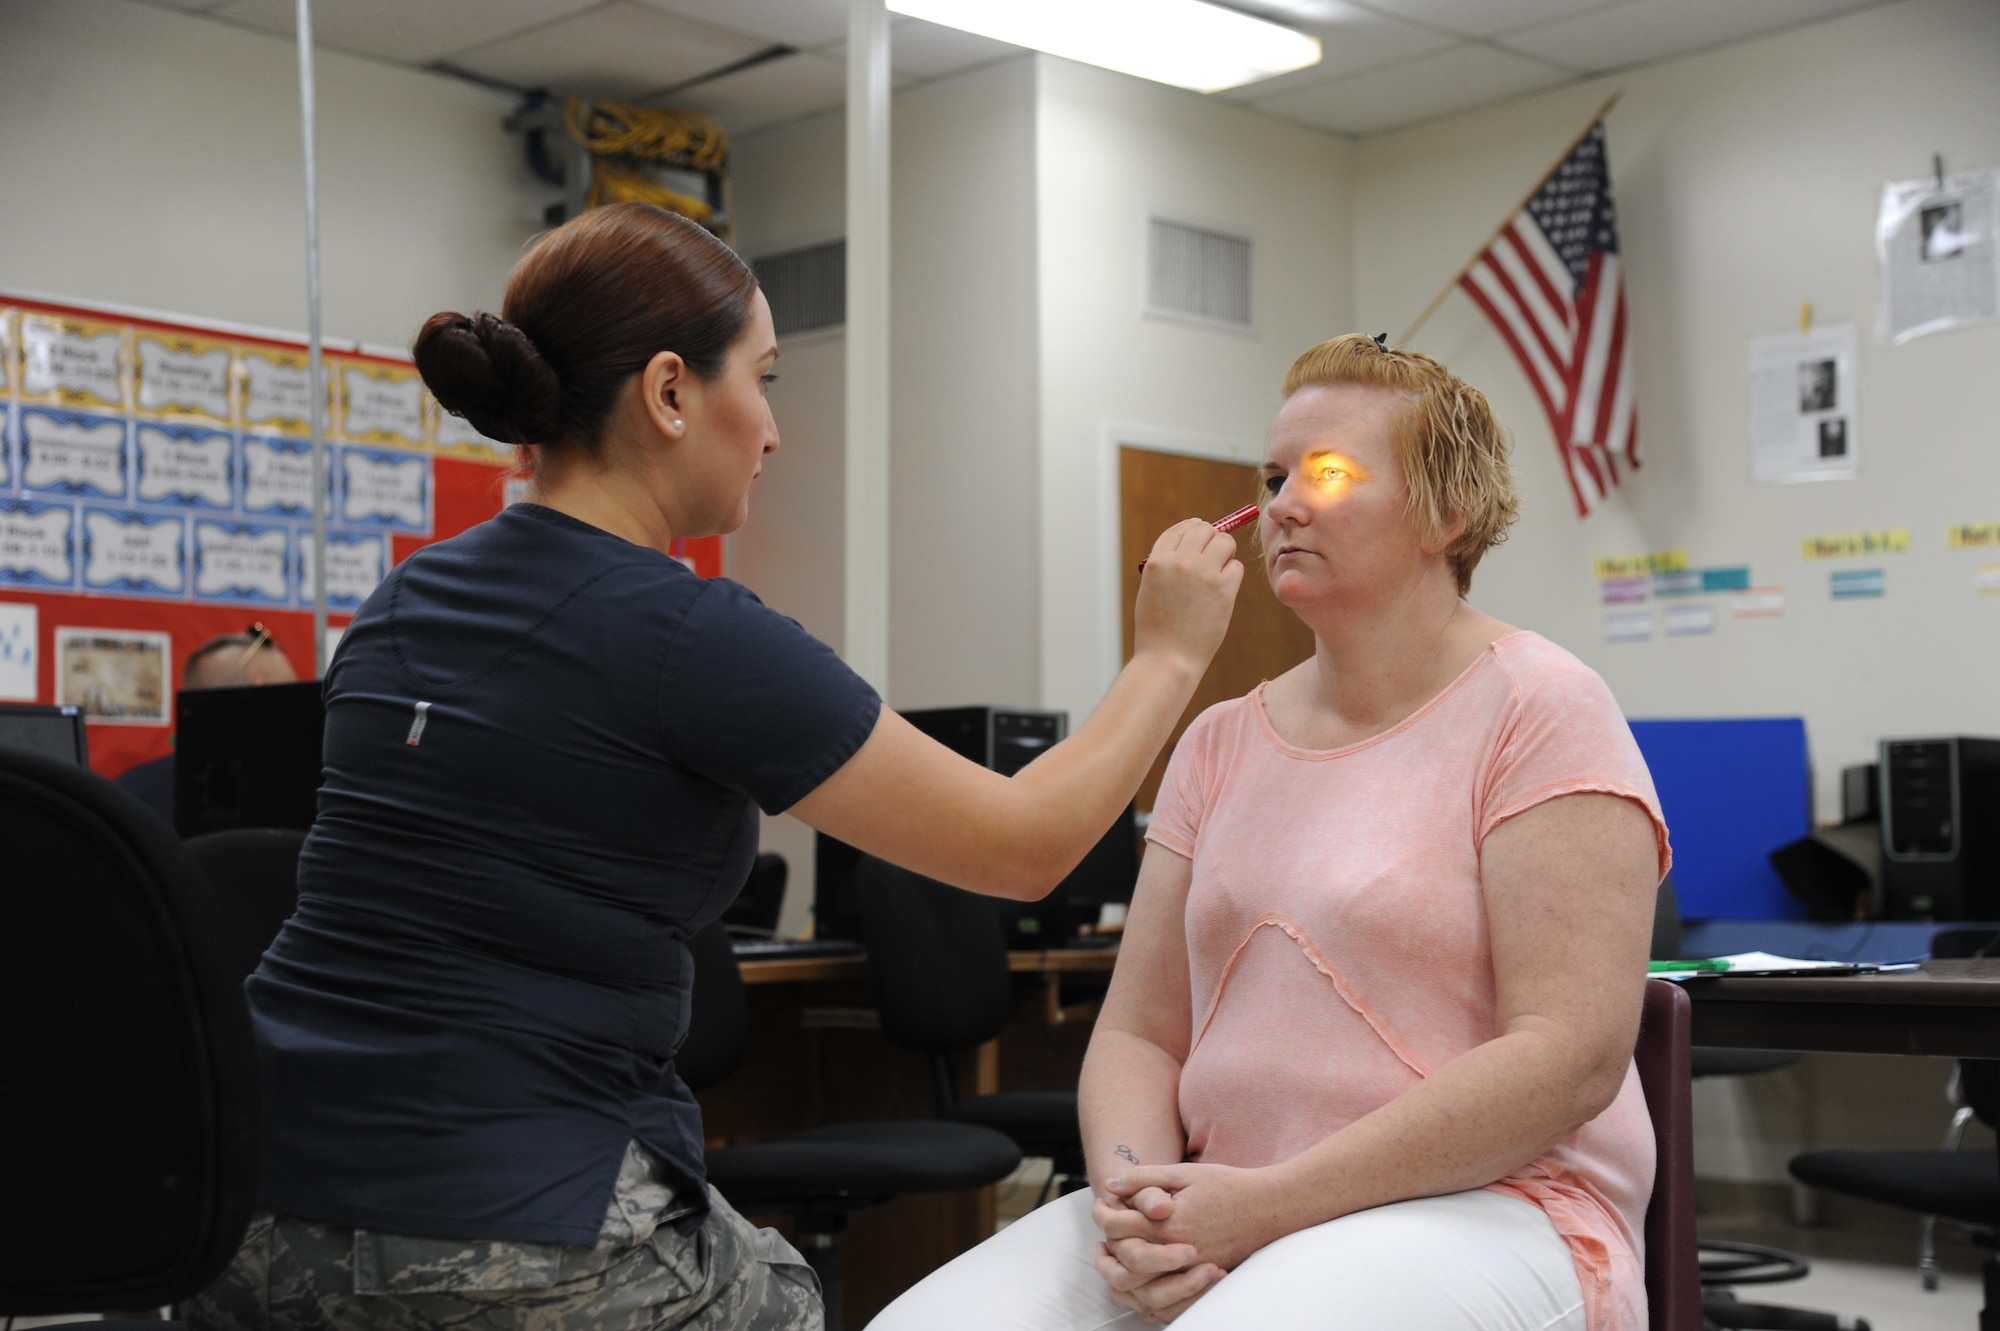 U.S. Air Force Staff Sgt. Christine Narro, optometry technician, 433rd Aeromedical Squadron, Joint Base San Antonio, Lackland Air Force Base, exams Trisha Diaz’s pupils during an eye exam. Diaz participated in the no-cost medical services offered during the Ozark Highlands Innovated Readiness Training, Mountain Home, Arkansas, 5-12 June. (U.S. Air Force photo by Tech. Sgt. Peter Dean)  